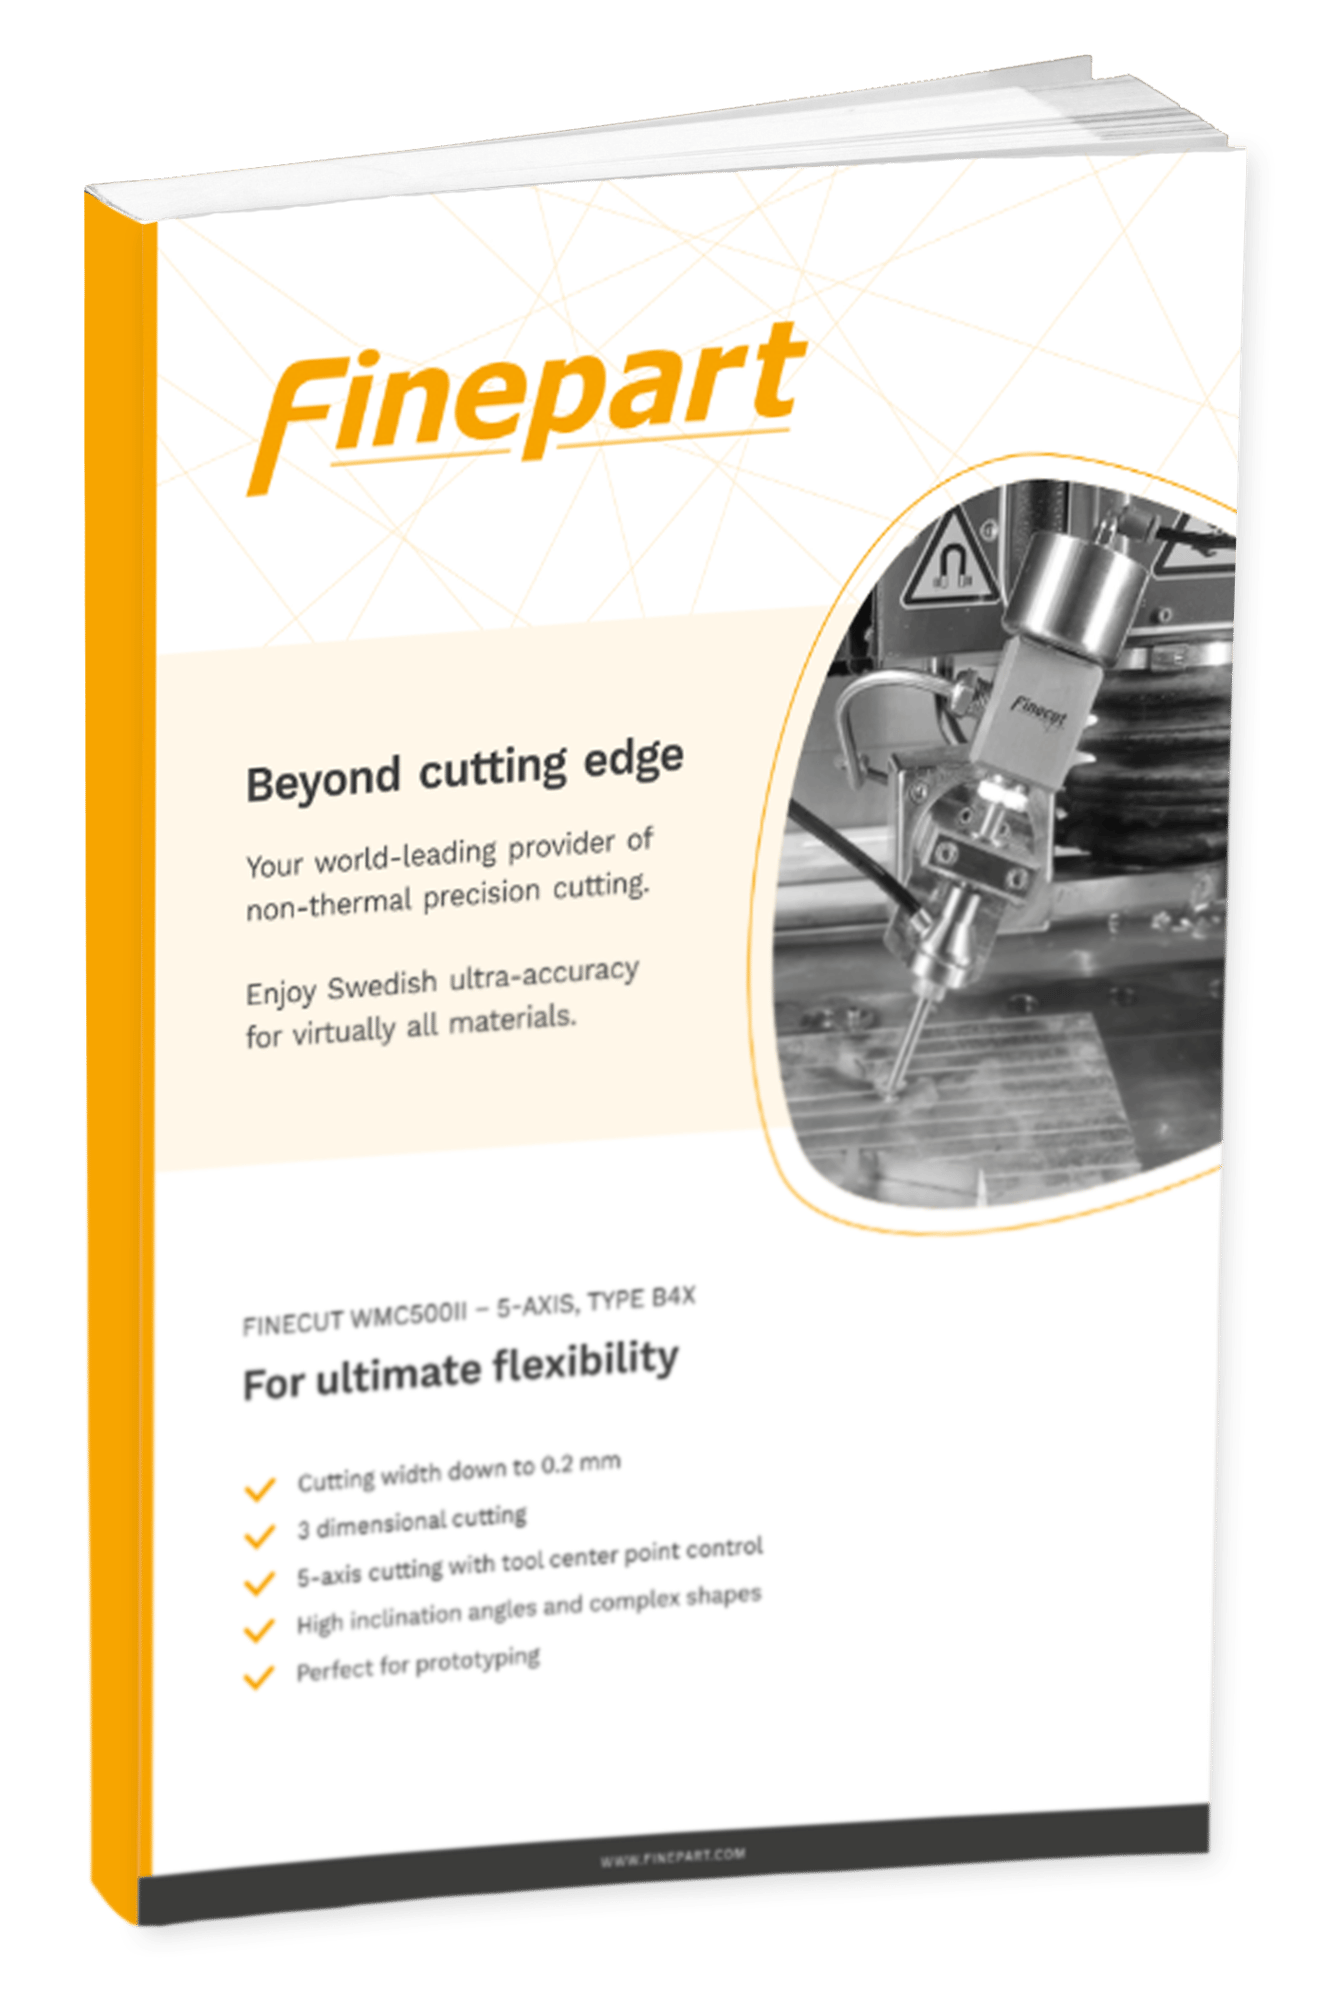 Ebook Cover Guide with Shadow Finepart Product briefing-5-axis B4X, vA0